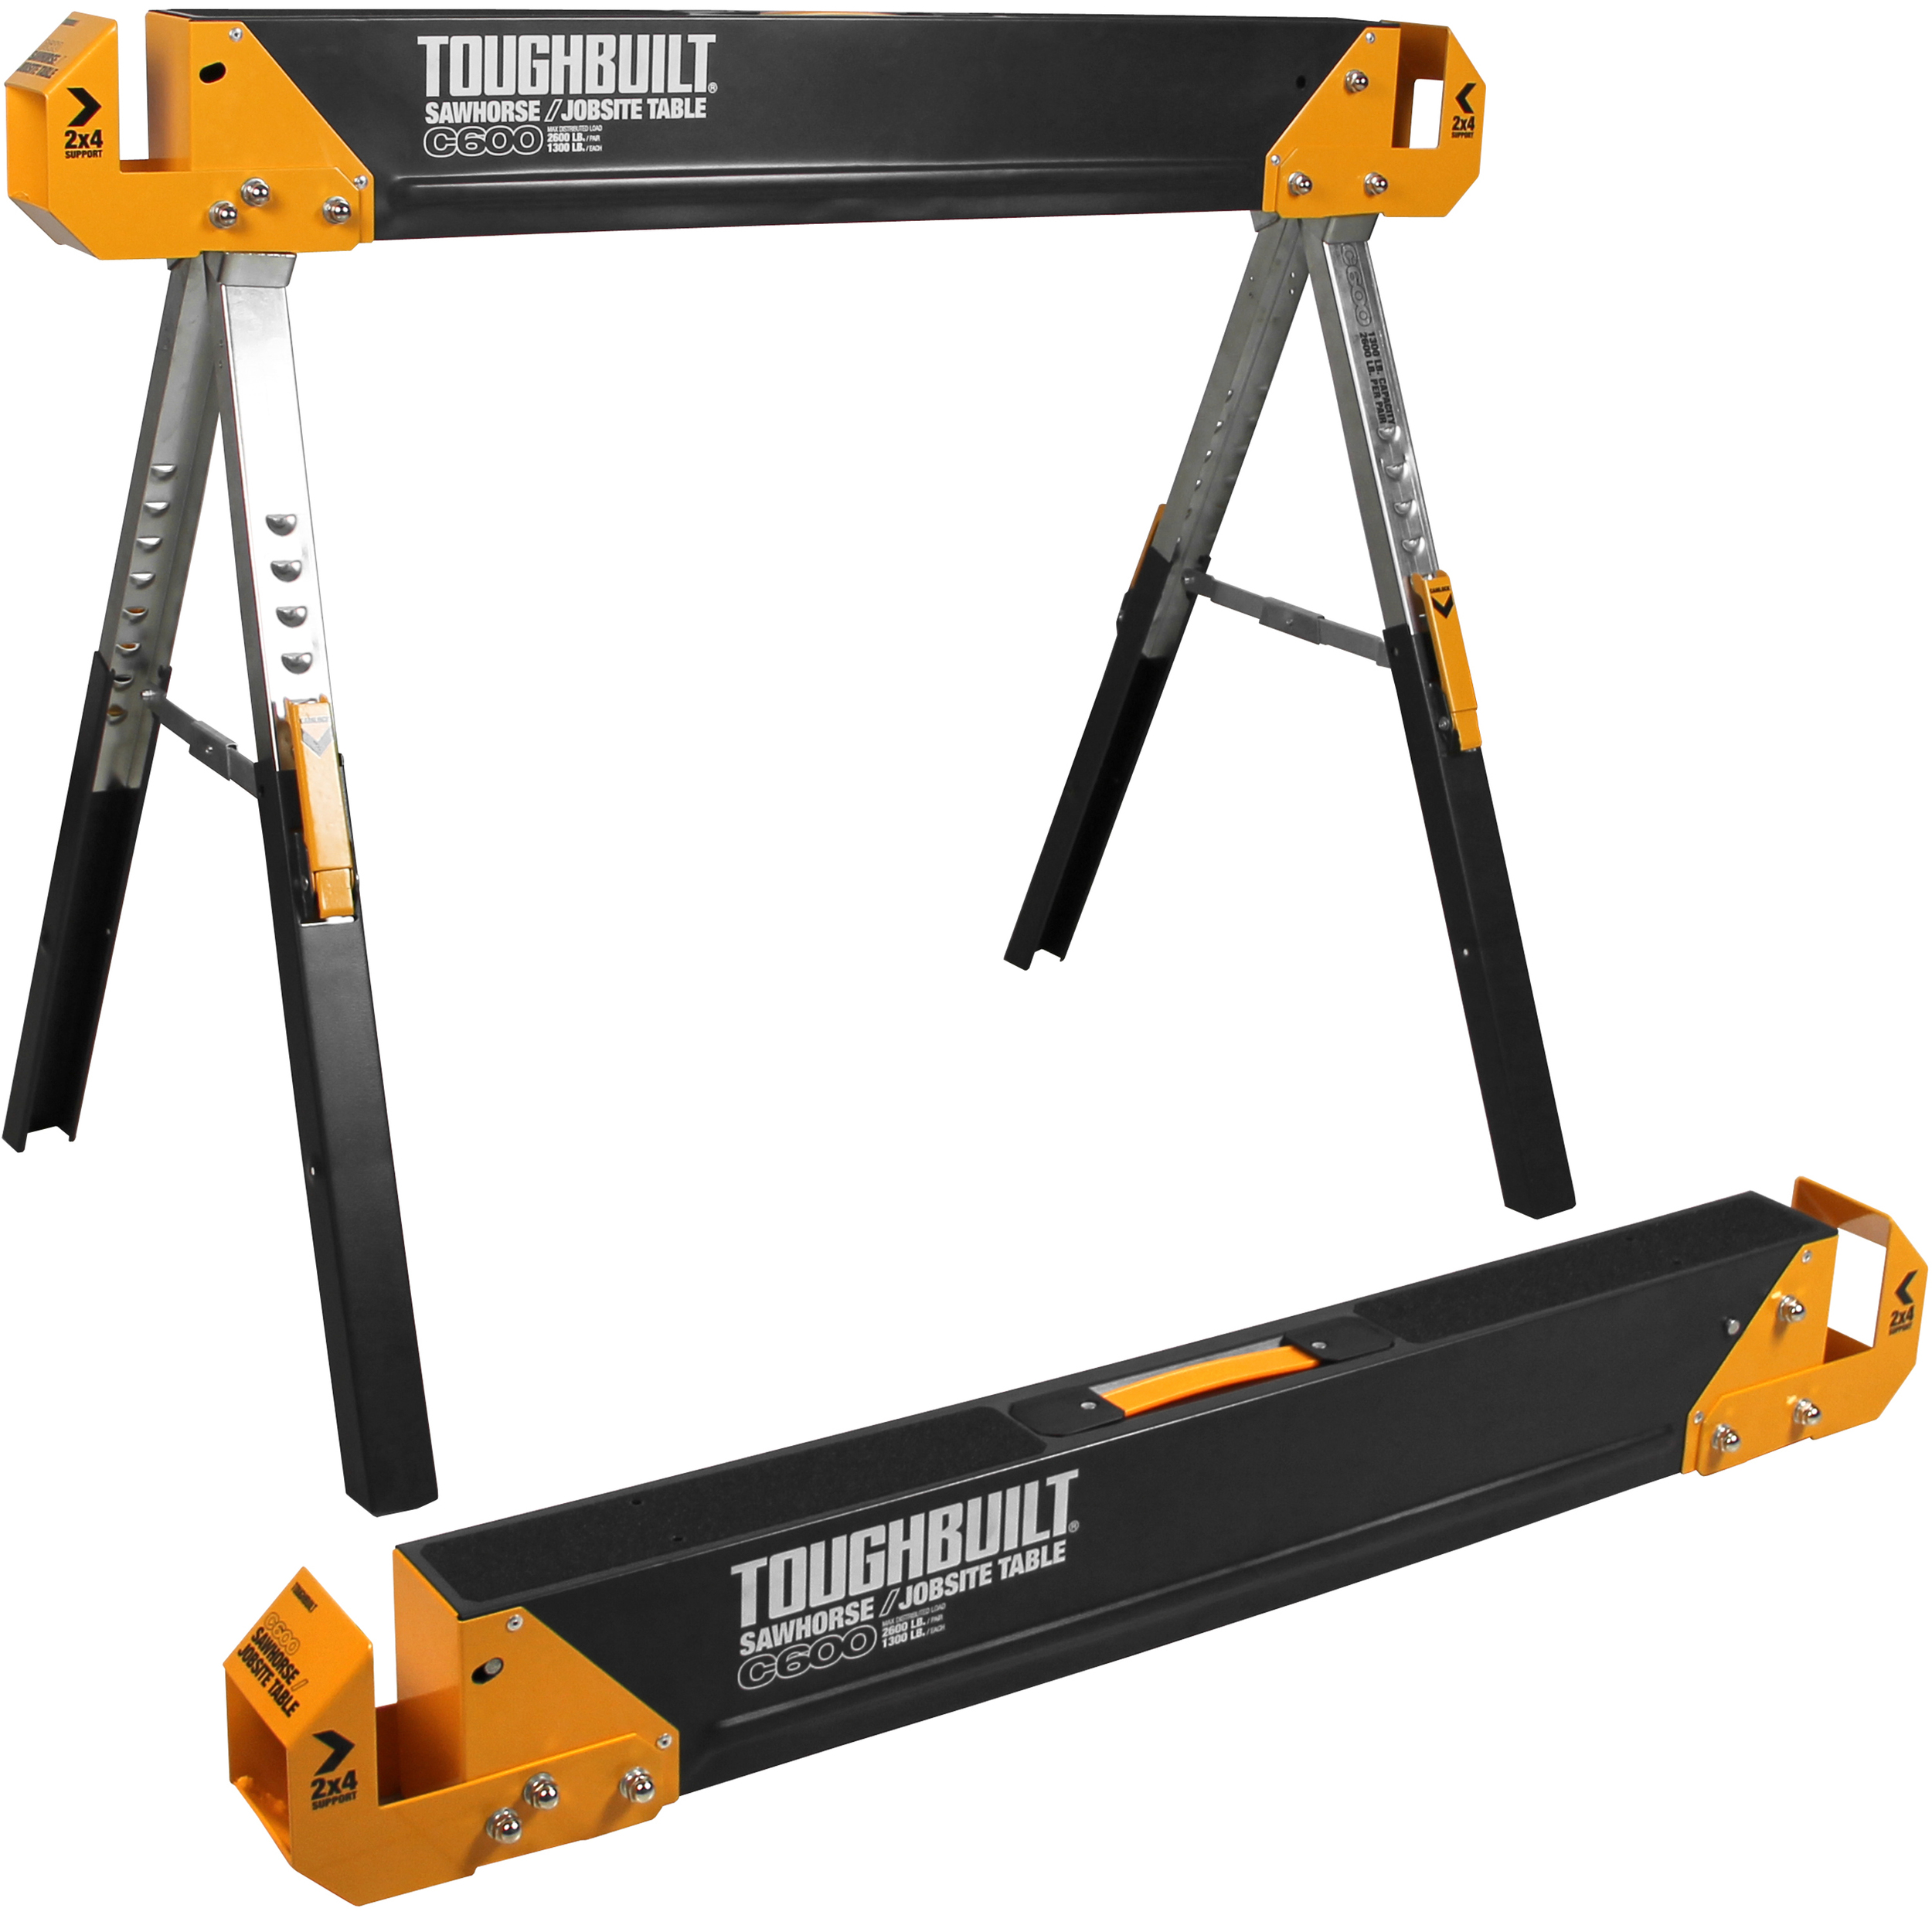 TOUGHBUILT Steel Saw Horse Portable Folding Work Table Wood Cutting Holder Tool 